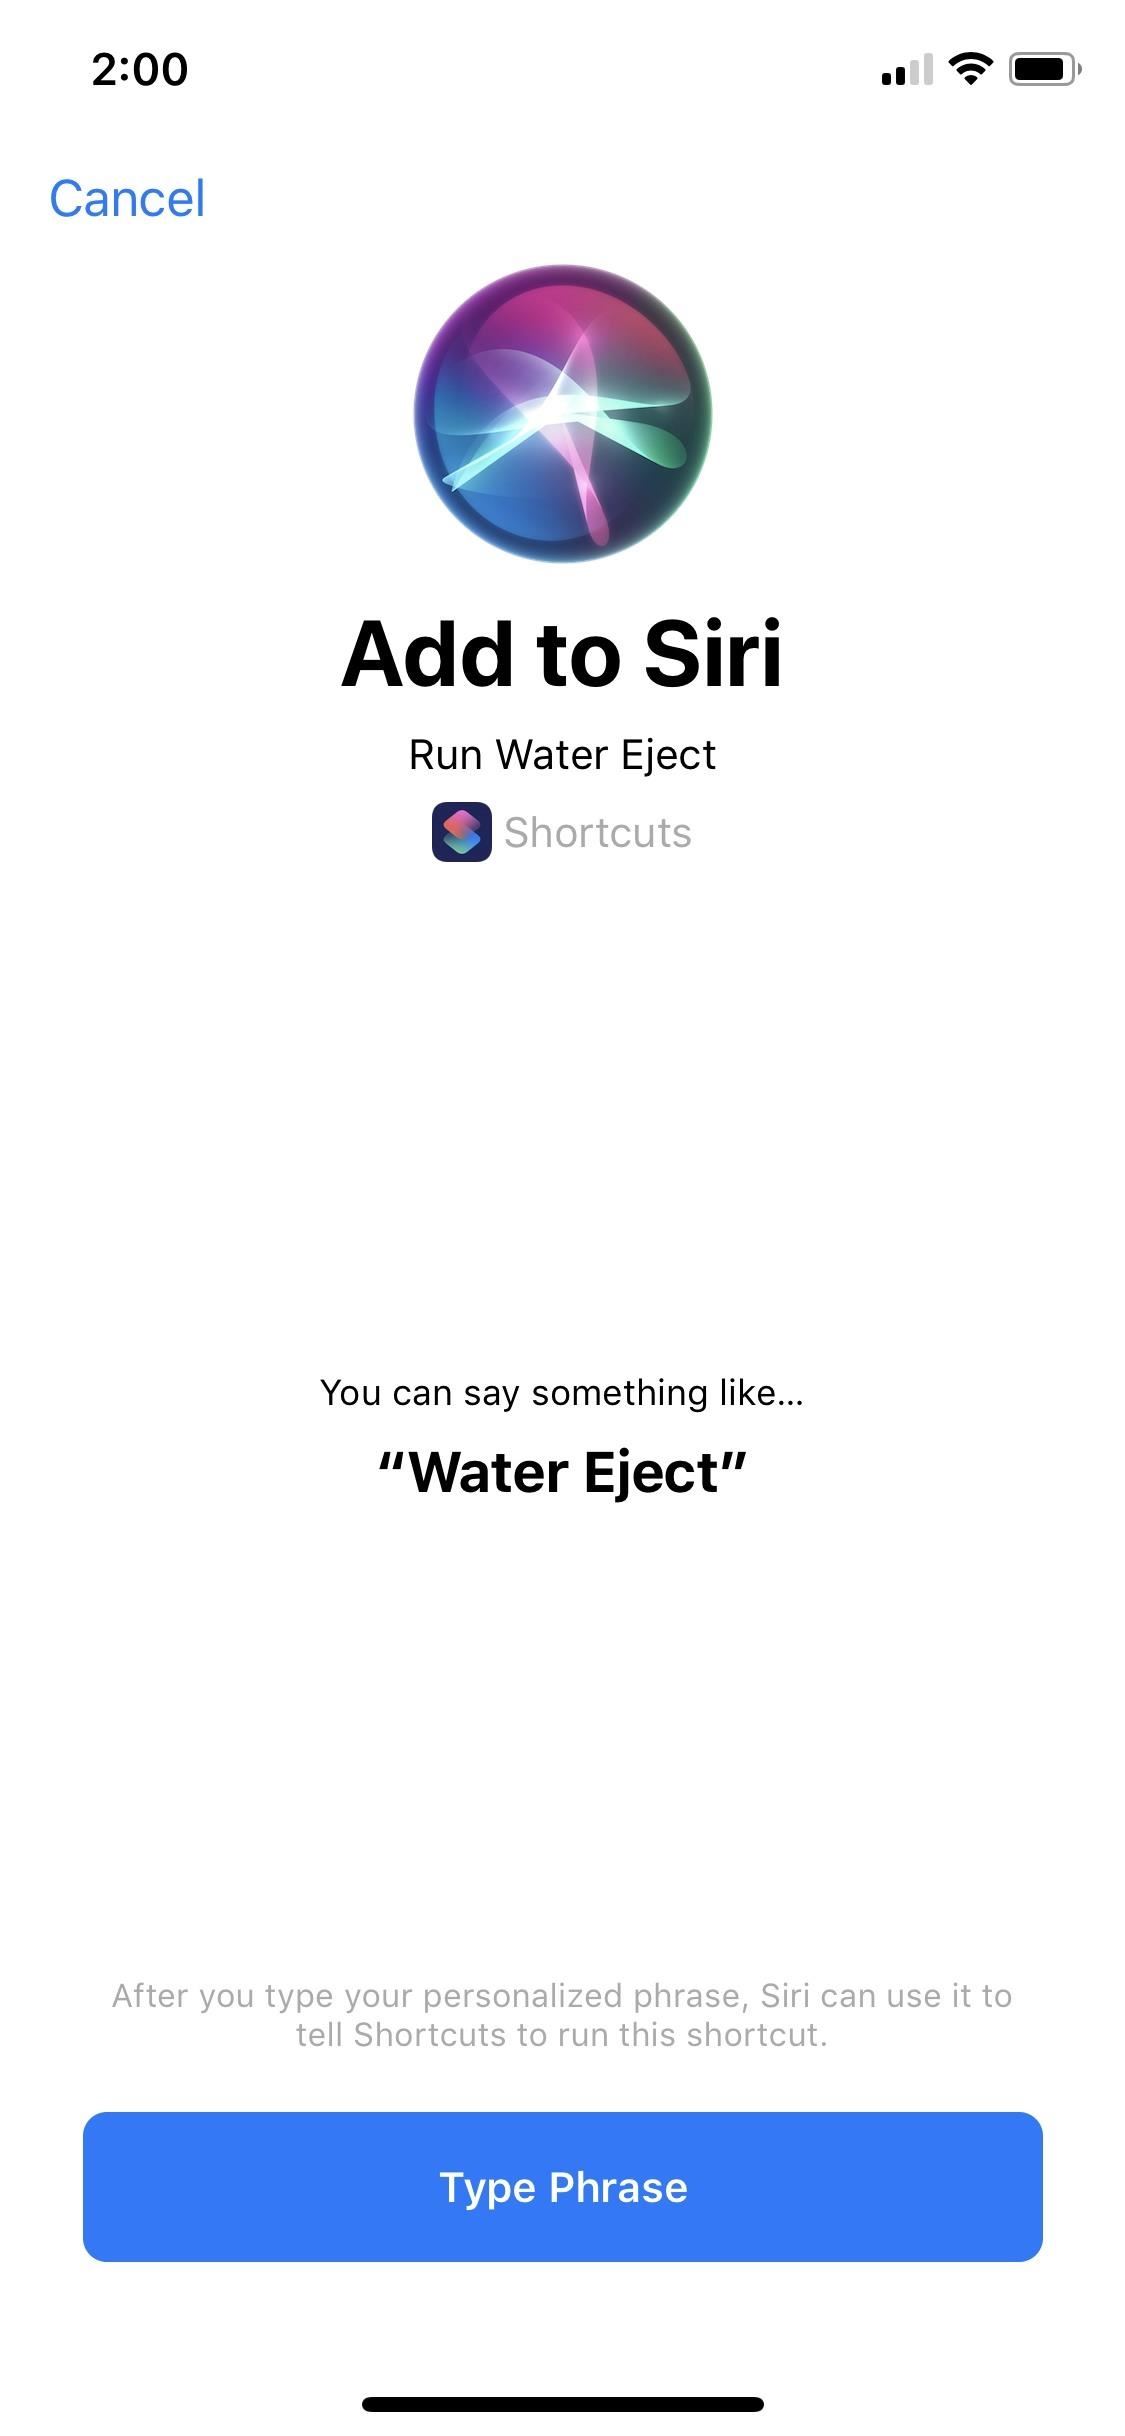 Water eject